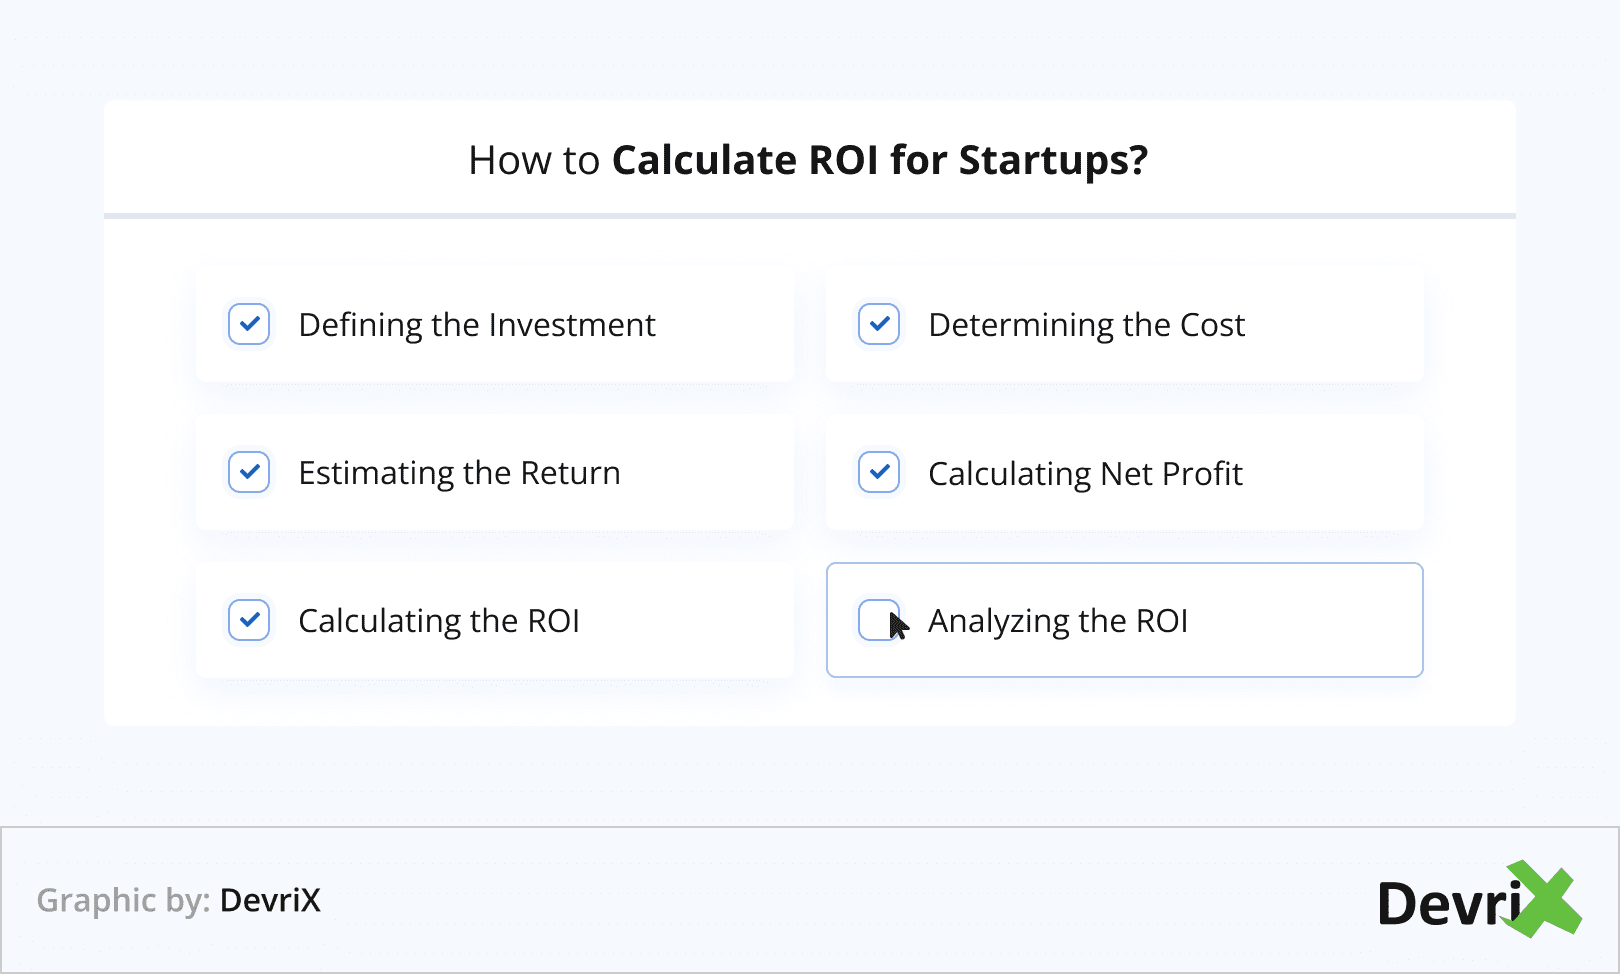 How to Calculate ROI for Startups